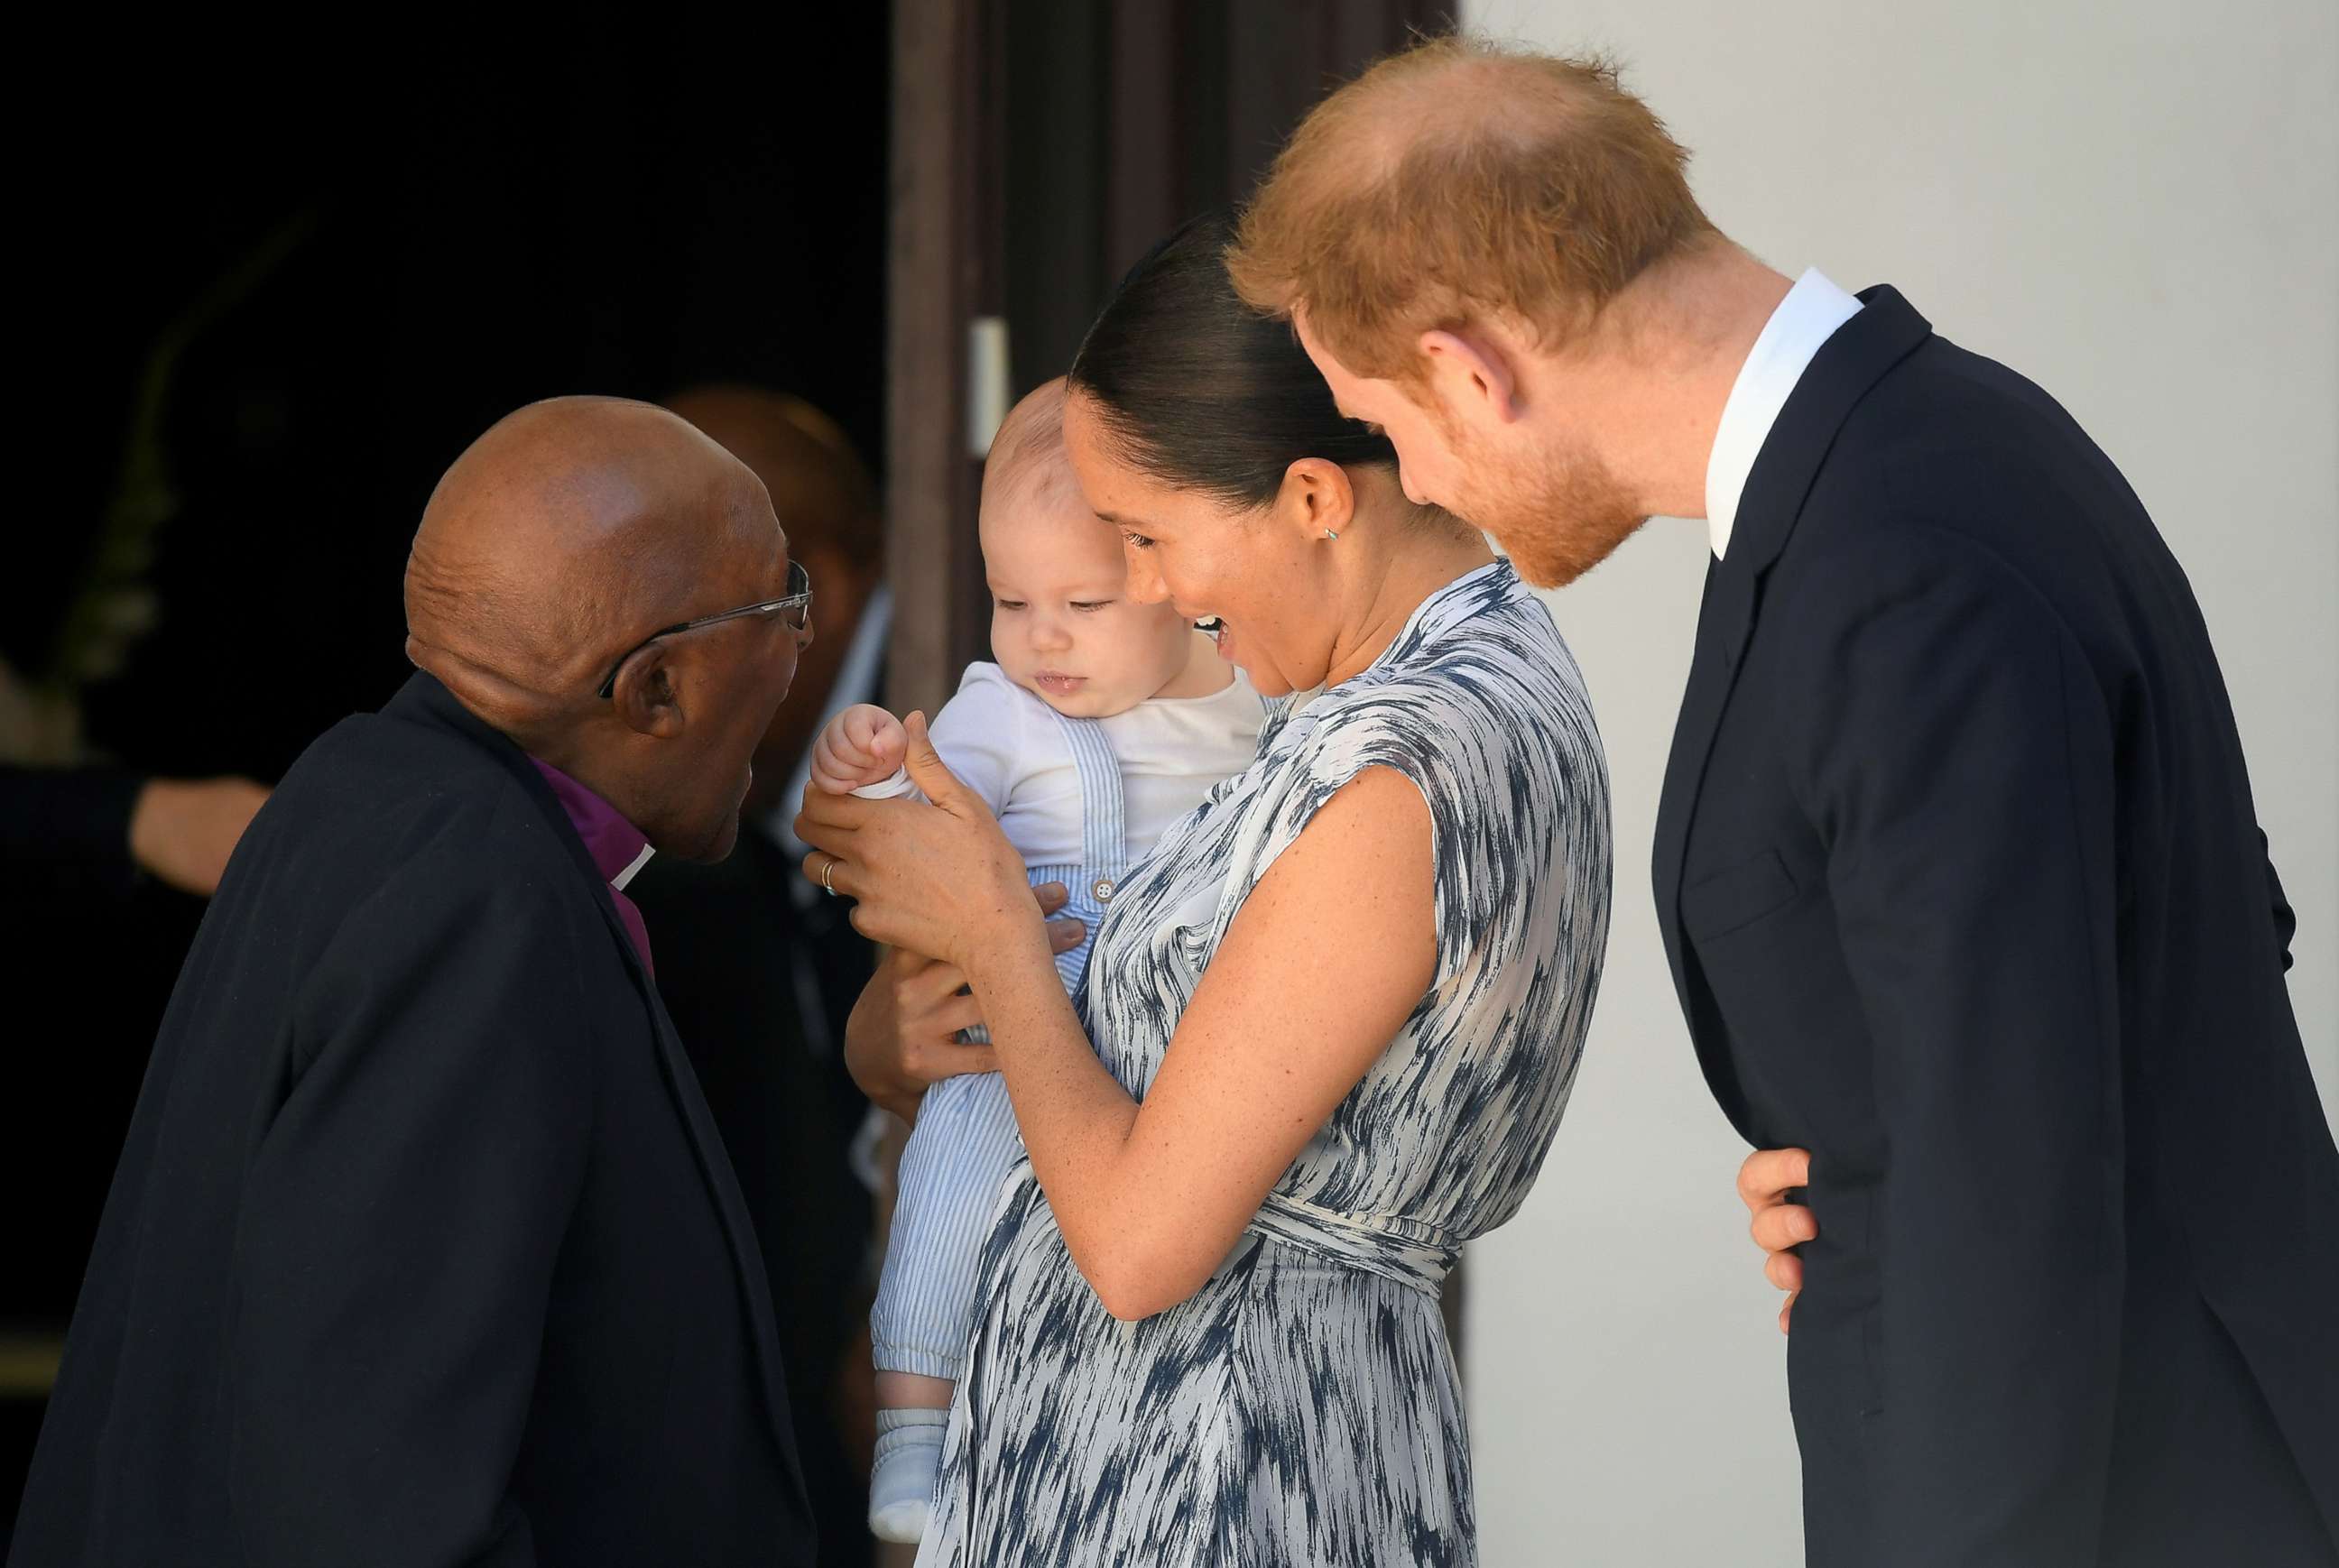 PHOTO: Britain's Prince Harry and his wife Meghan, Duchess of Sussex, holding their son Archie, meet Archbishop Desmond Tutu at the Desmond & Leah Tutu Legacy Foundation in Cape Town, South Africa, Sept. 25, 2019.